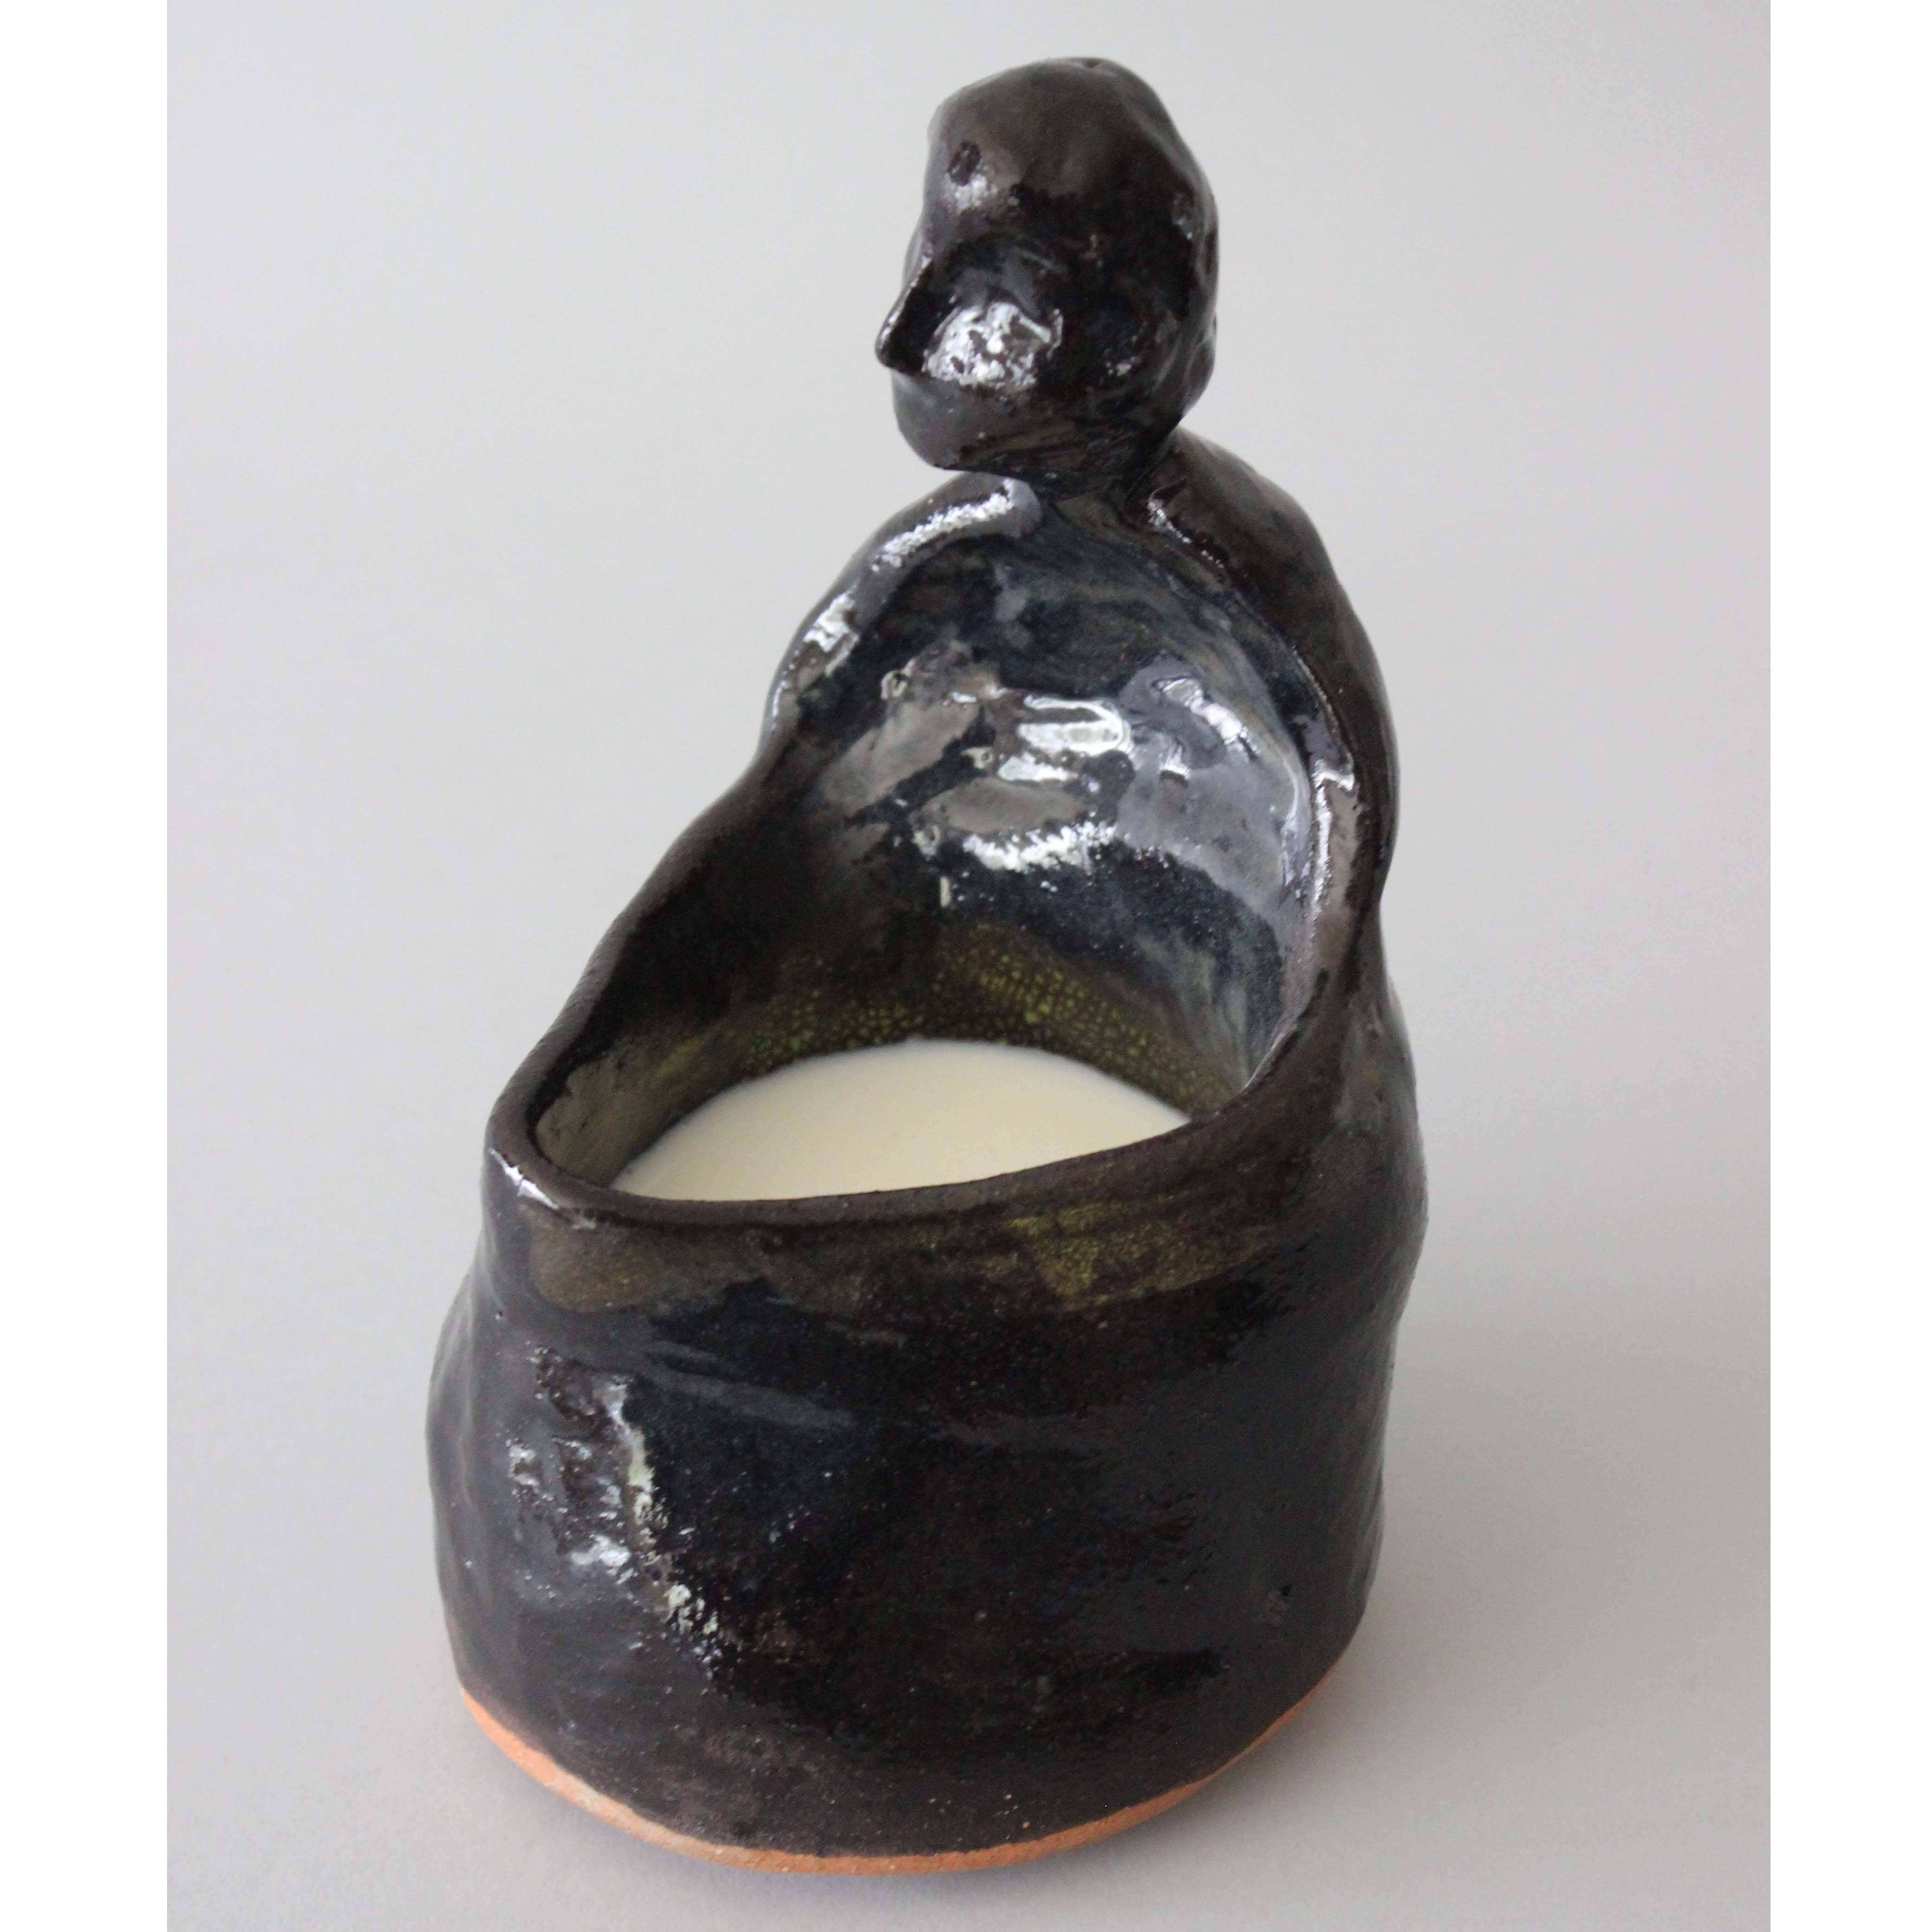 A glazed terra cotta ceramic vessel decanter by West Village NYC ceramic Fran, circa 1970, from the estate of Alvin Nikolais and Murray Louis.
      